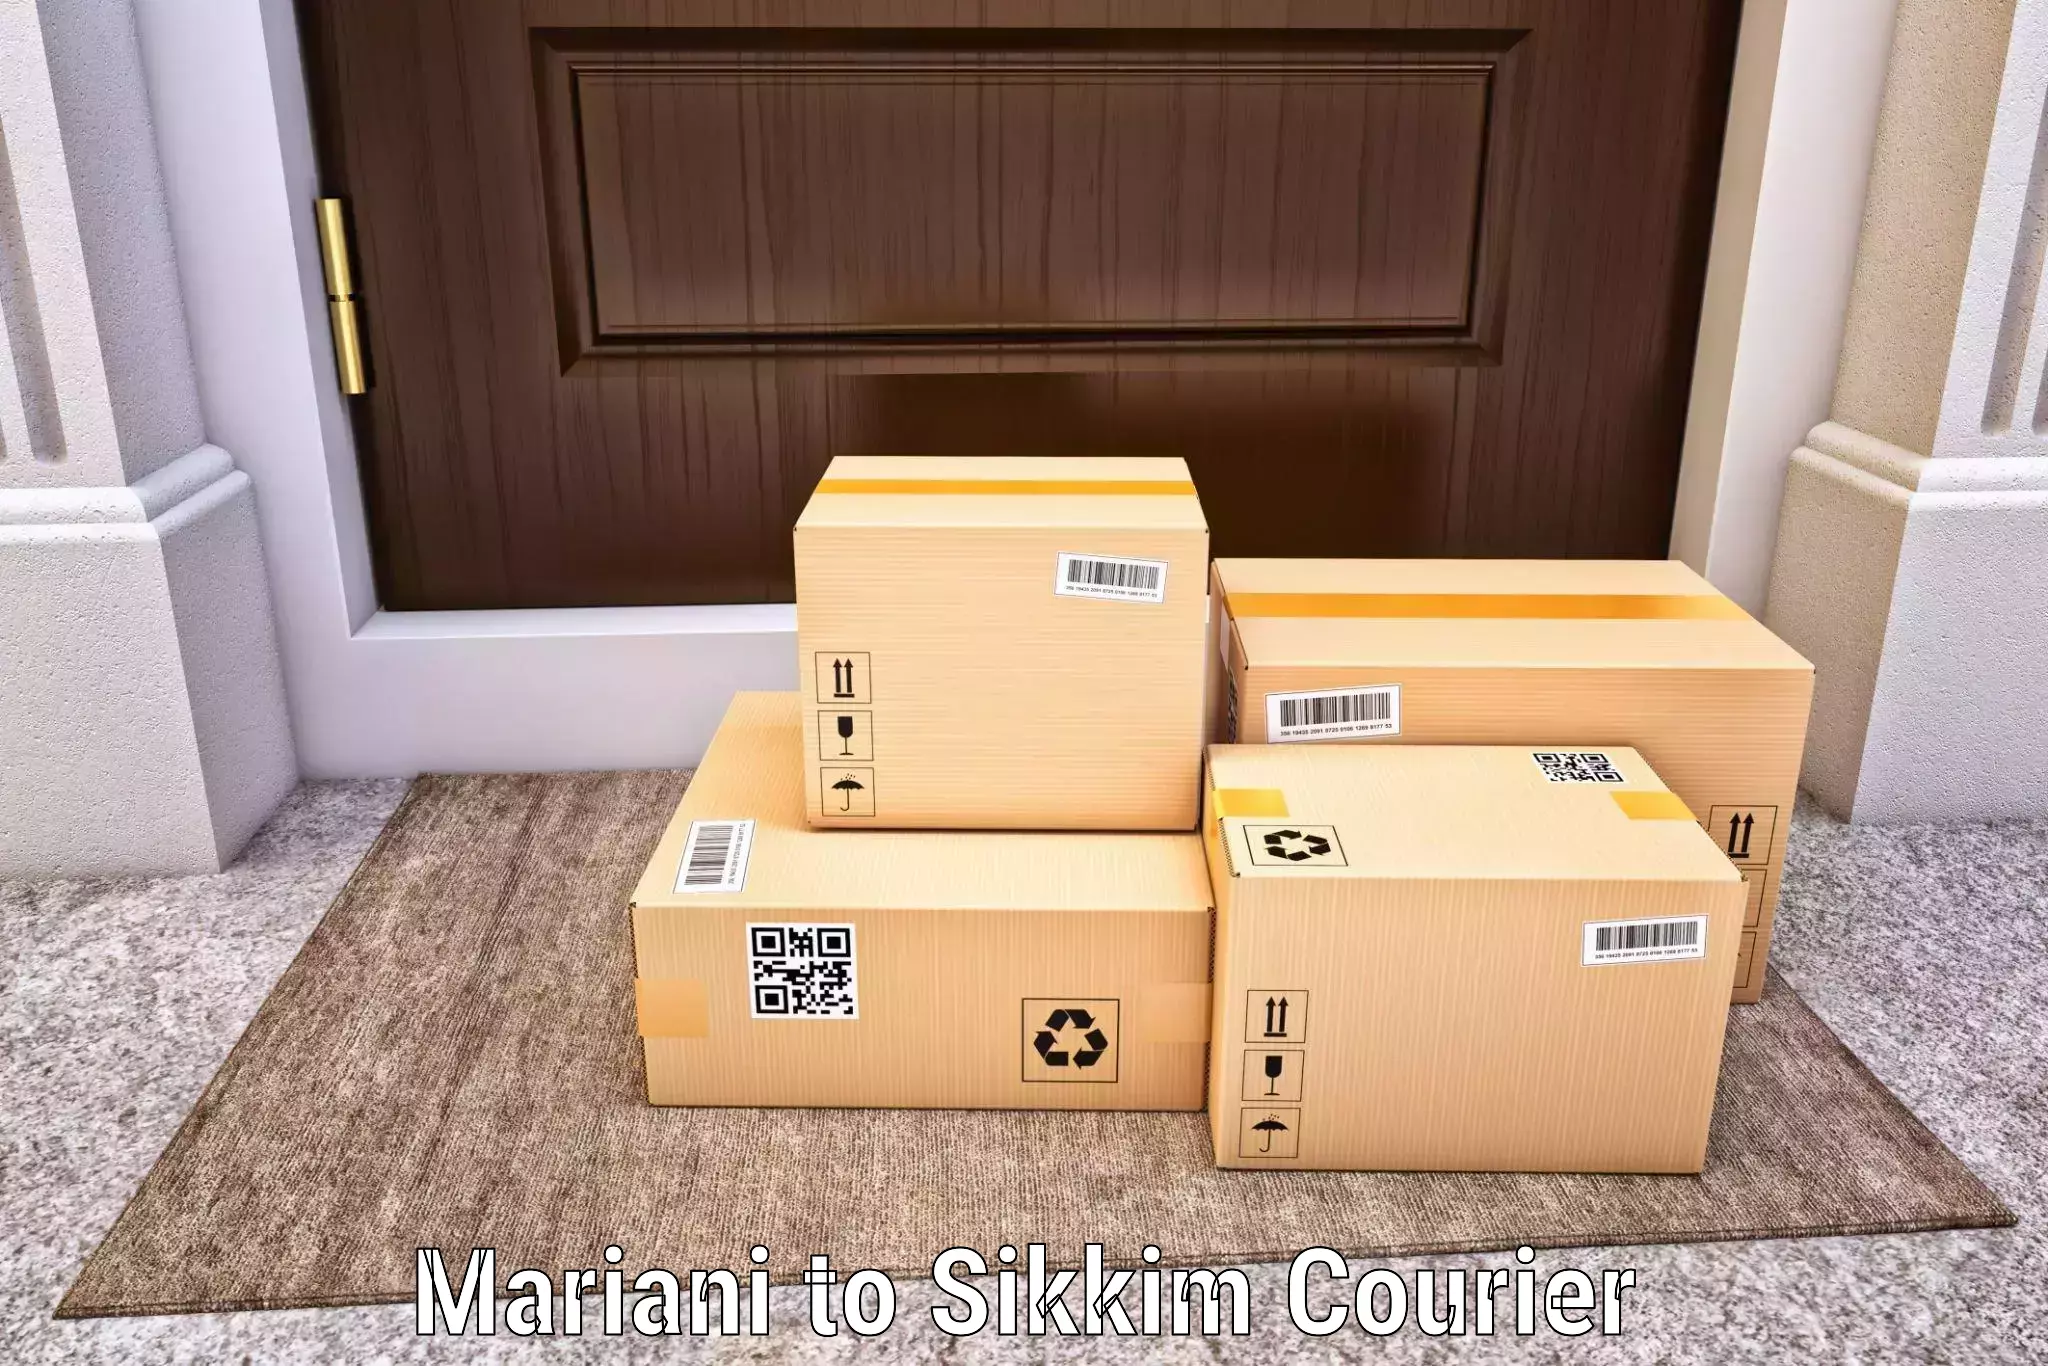 Full-service courier options Mariani to Sikkim